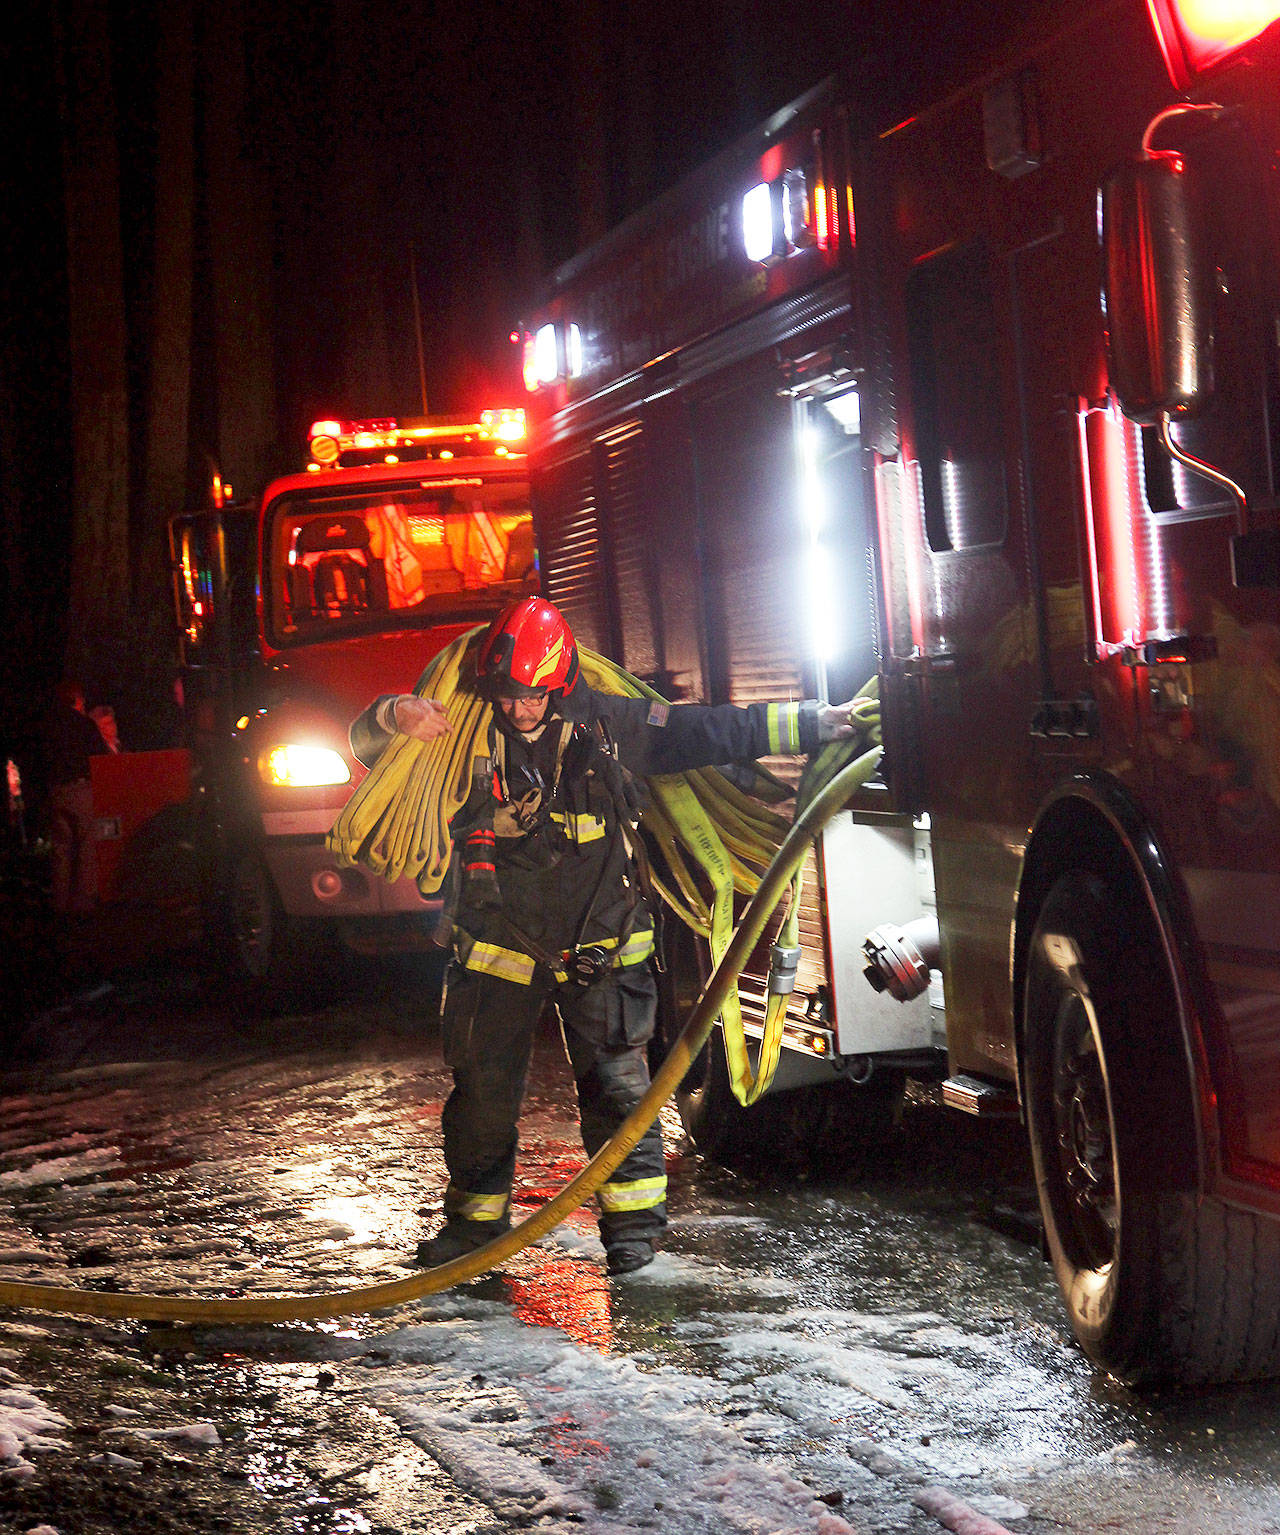 Lt. Marv Raavel, with Central Whidbey Island Fire and Rescue, gathers a hose used to extinguish a residential fire Thursday night in Coupeville. No one was injured, but the home sustained significant smoke damage. Photo by Laura Guido/Whidbey News-Times